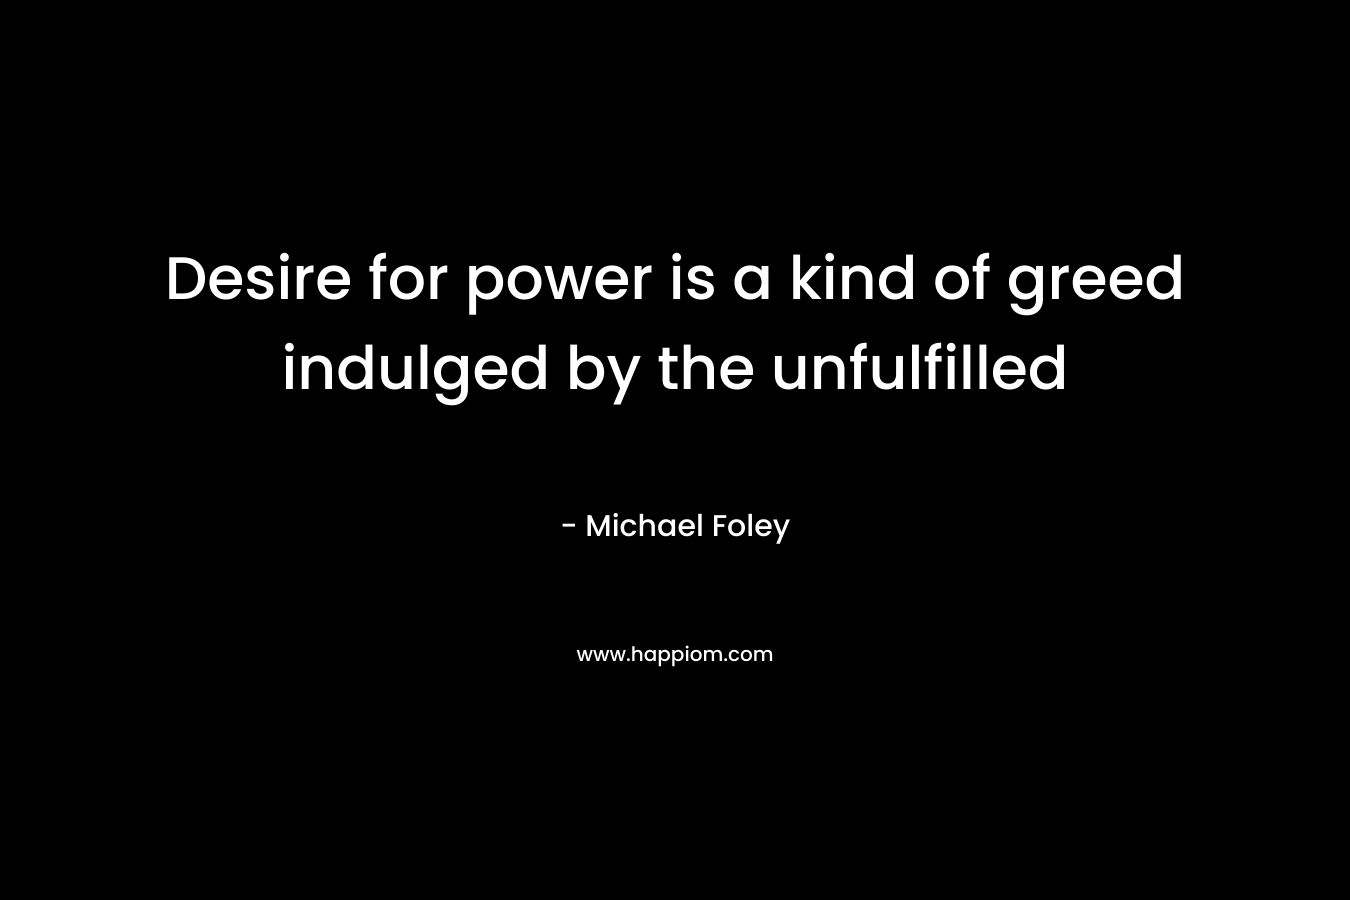 Desire for power is a kind of greed indulged by the unfulfilled – Michael Foley